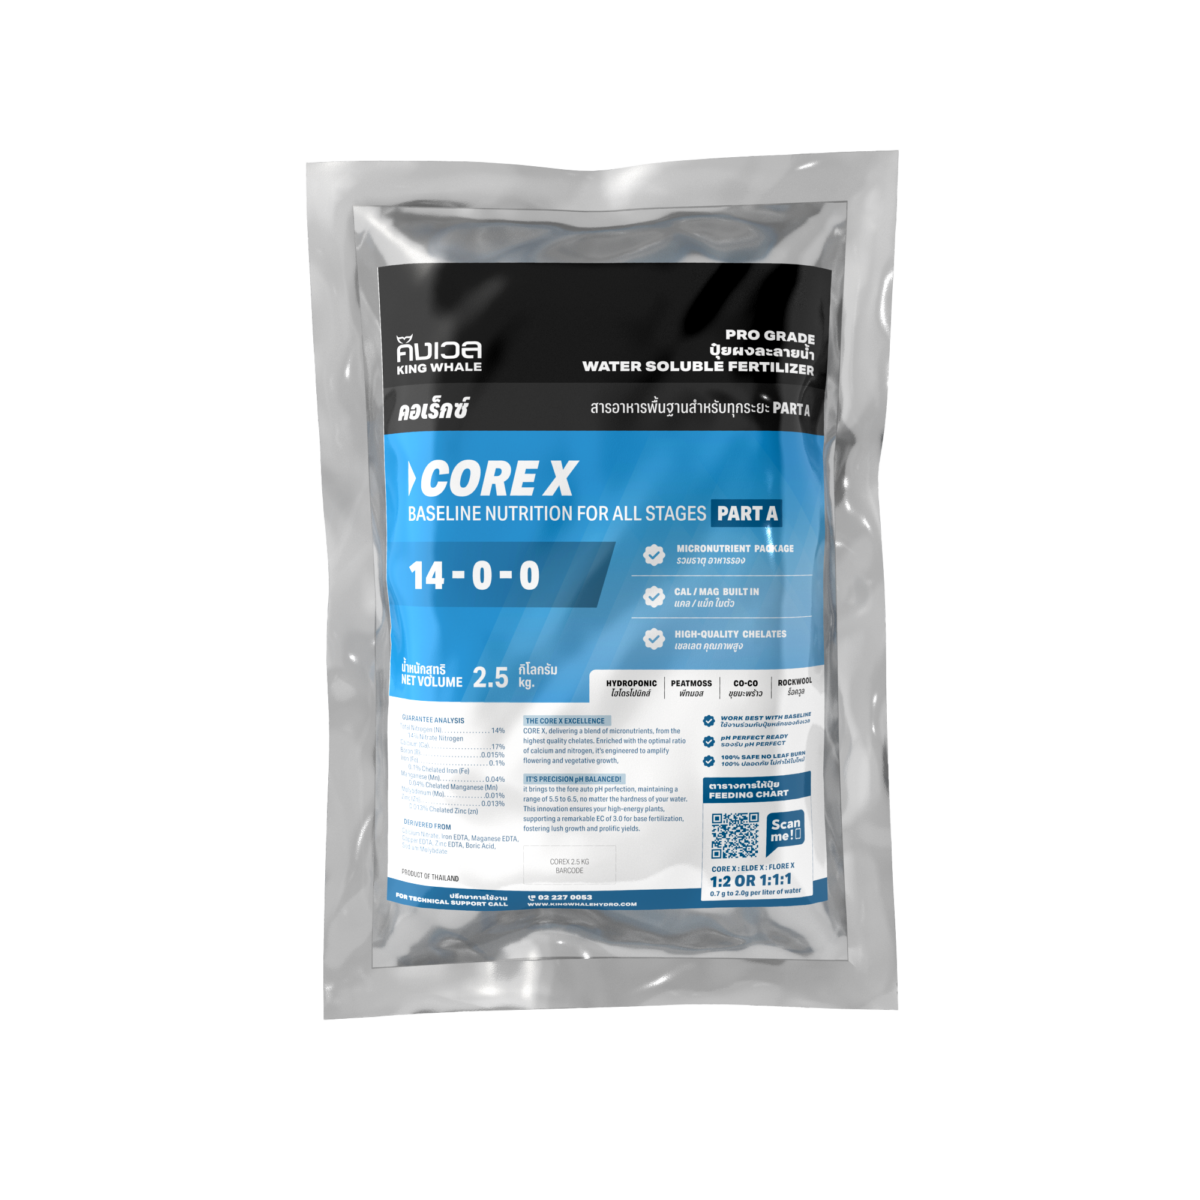 COREX 3.0 kg | Baseline nutrition for all stages part A - KING WHALE